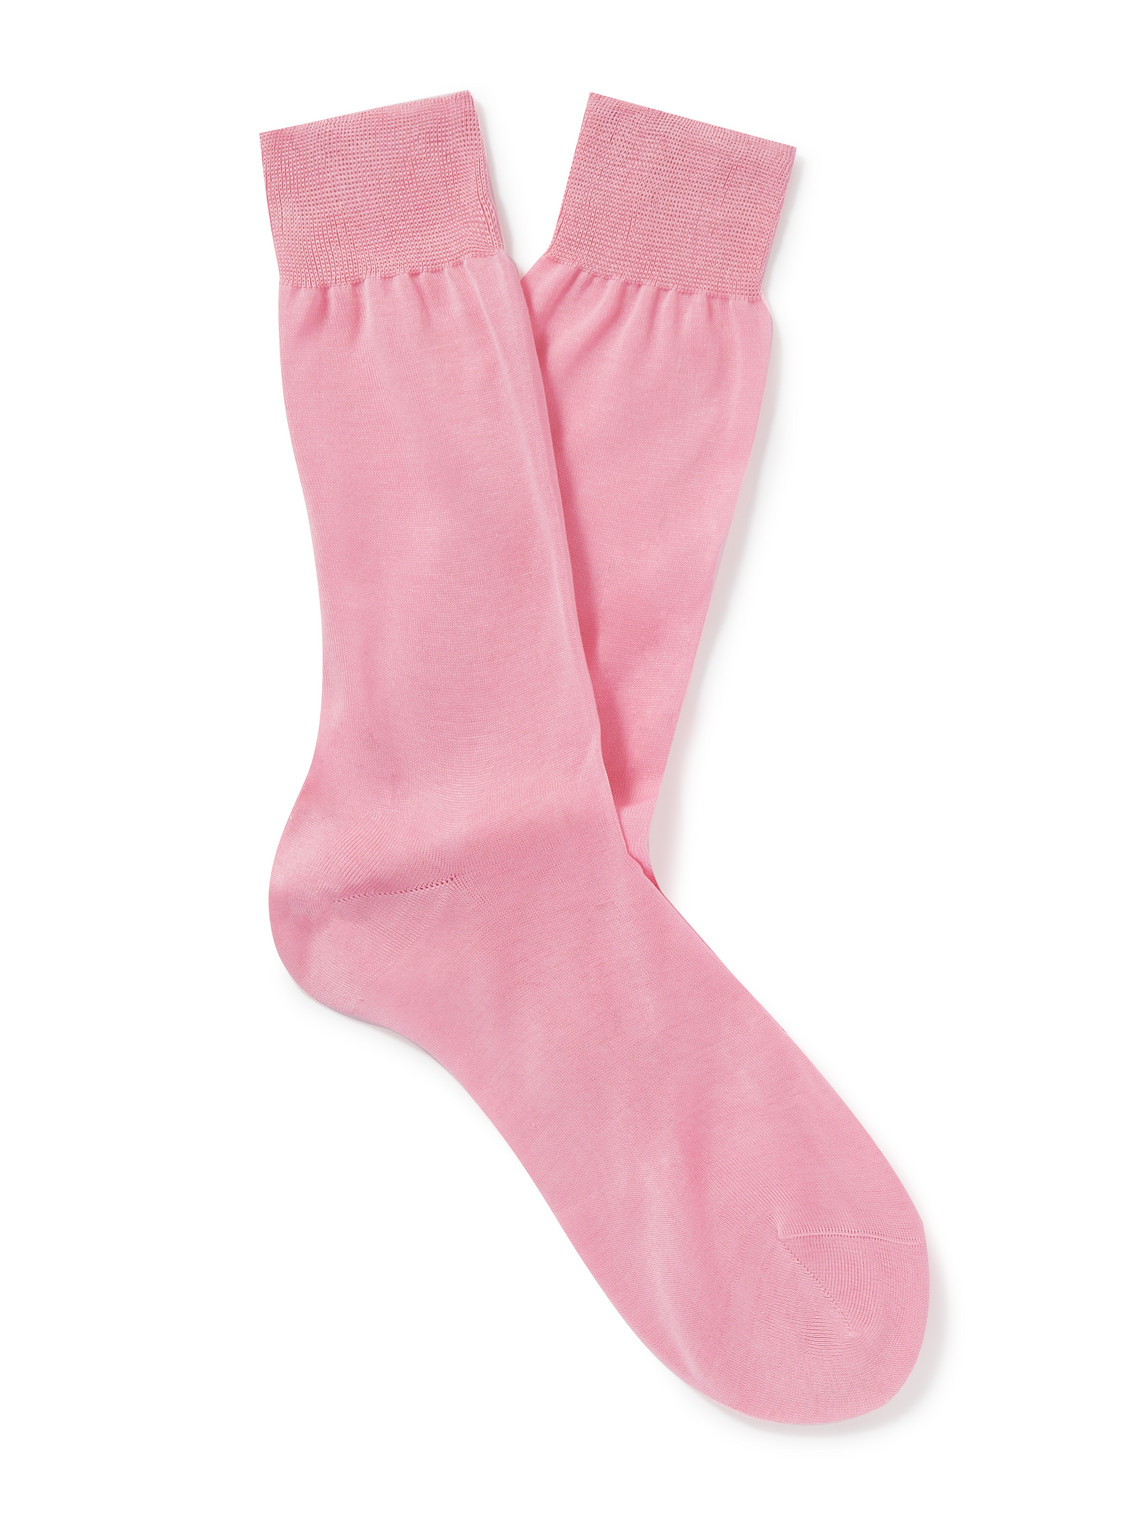 Anderson & Sheppard Cotton Socks In Pink